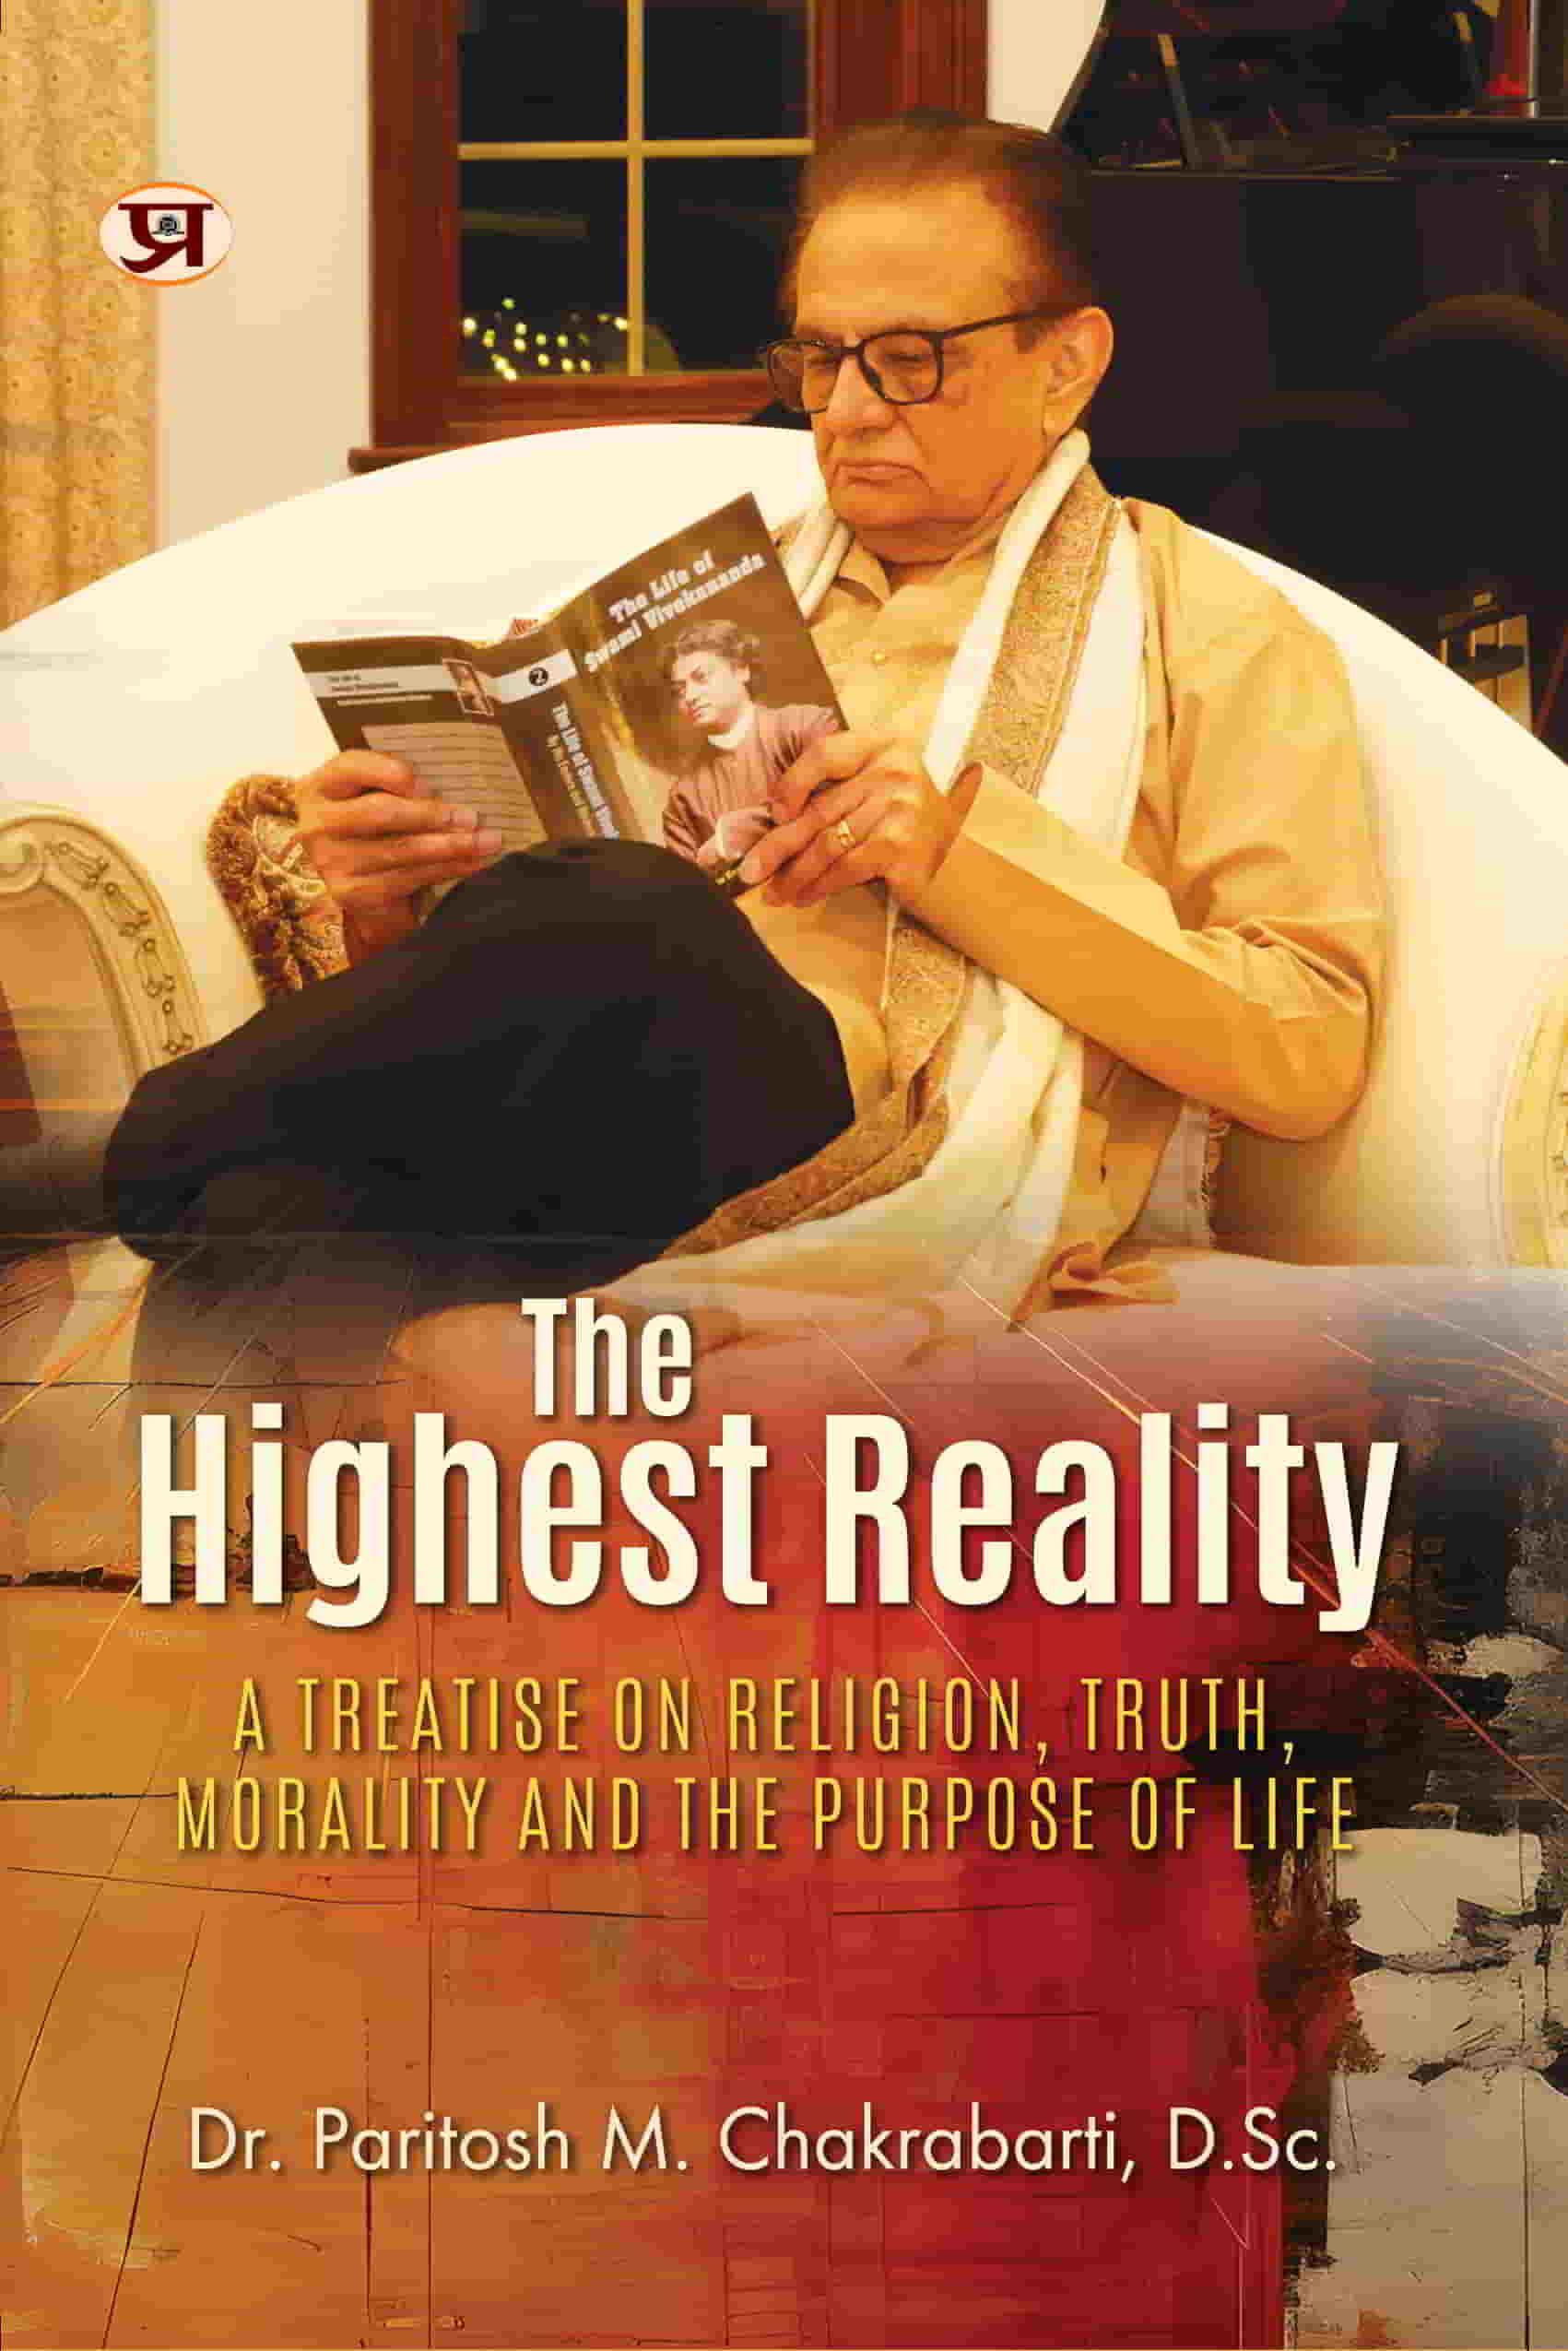 The Highest Reality | A Treatise on Religion, Truth, Morality and The Purpose of Life